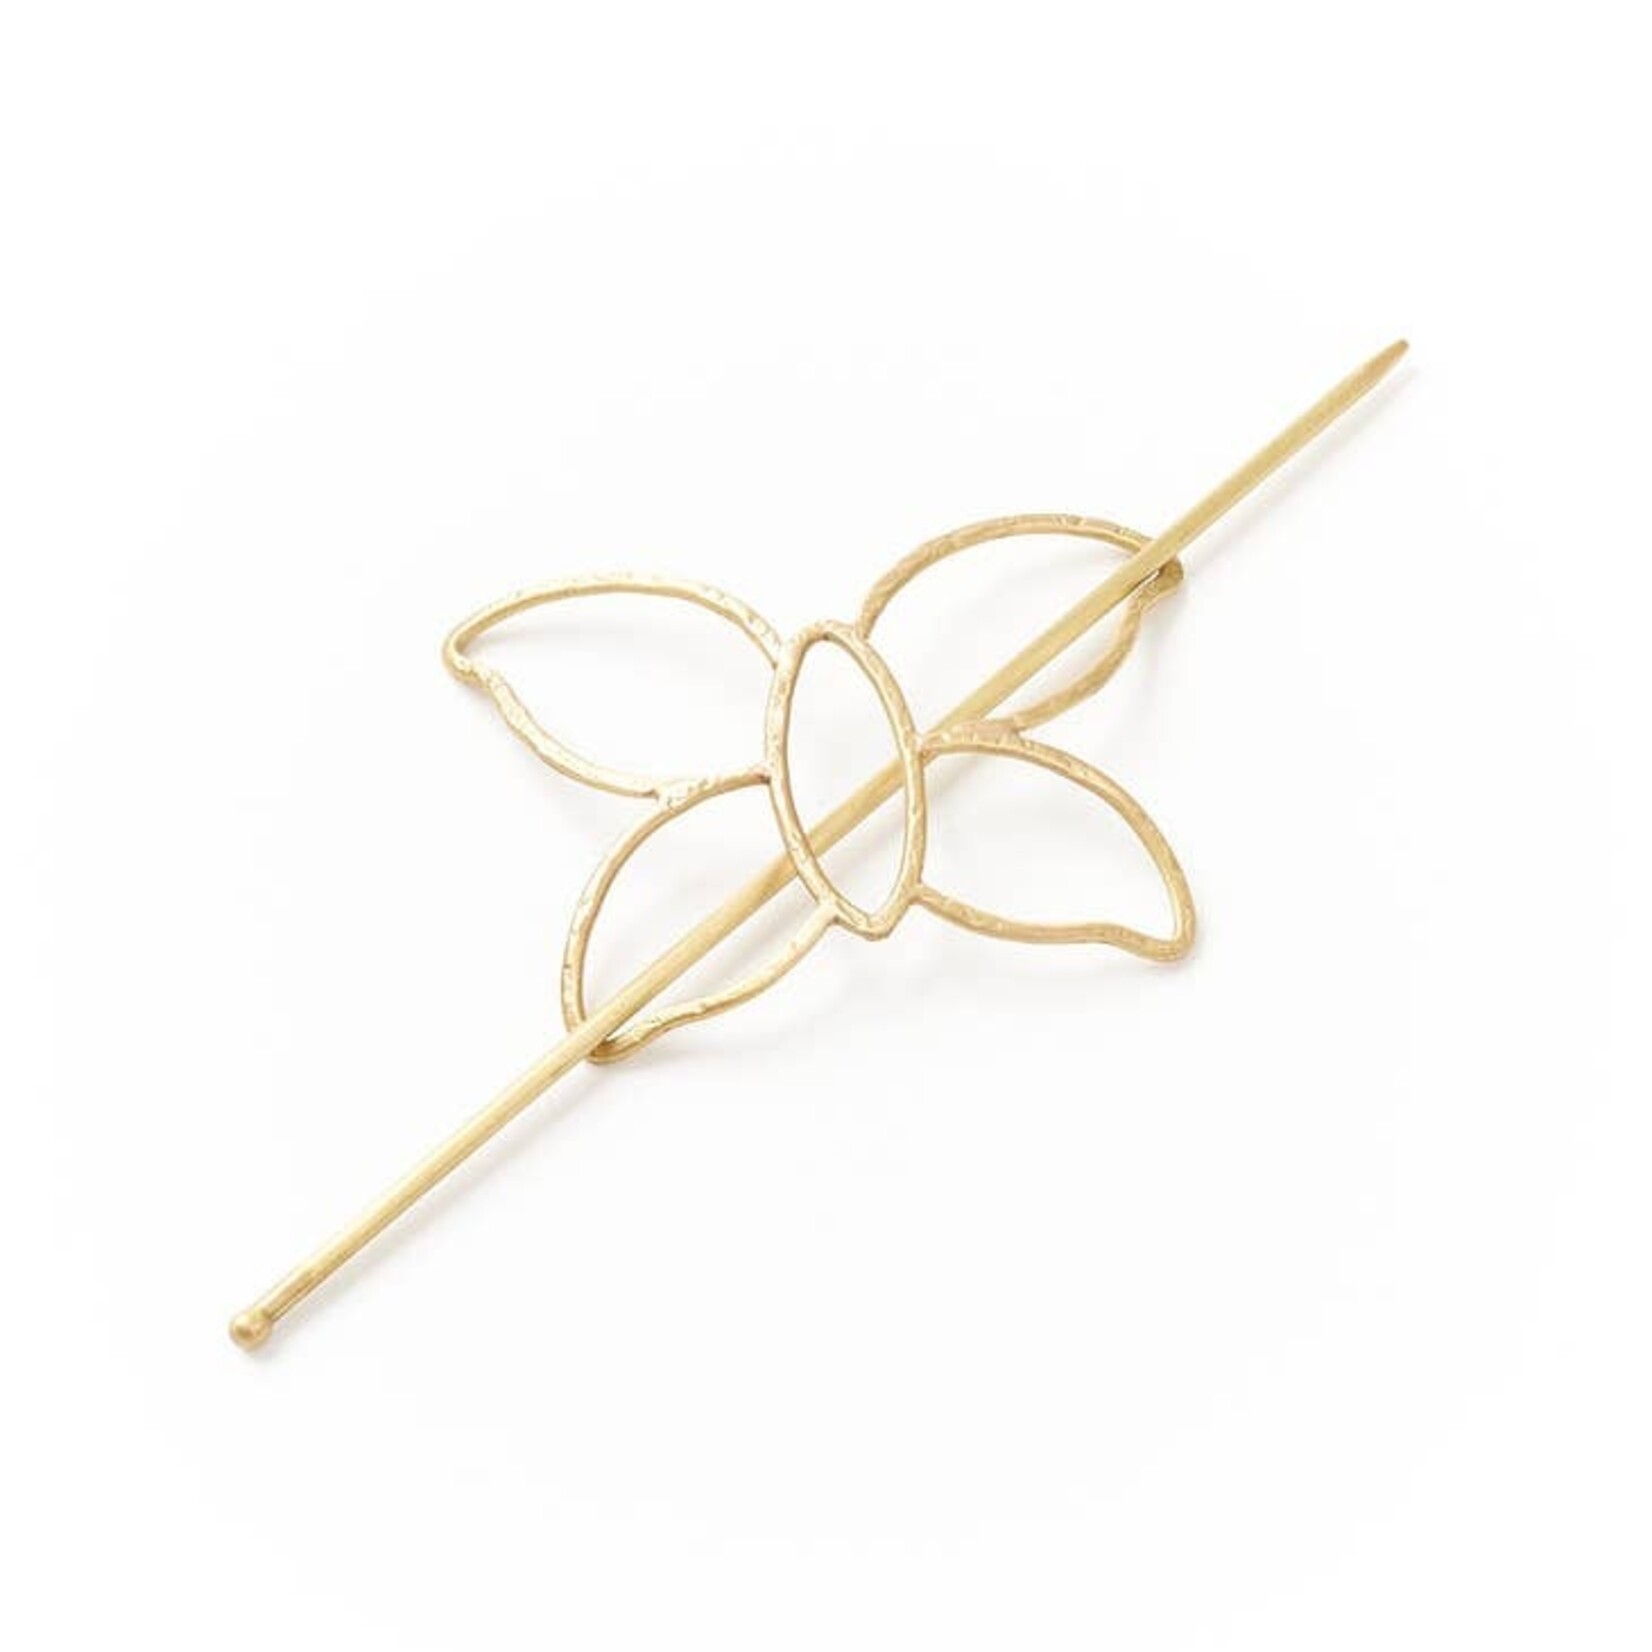 Matr Boomie Hiranya Butterfly Hair Slide with Stick - Gold, India